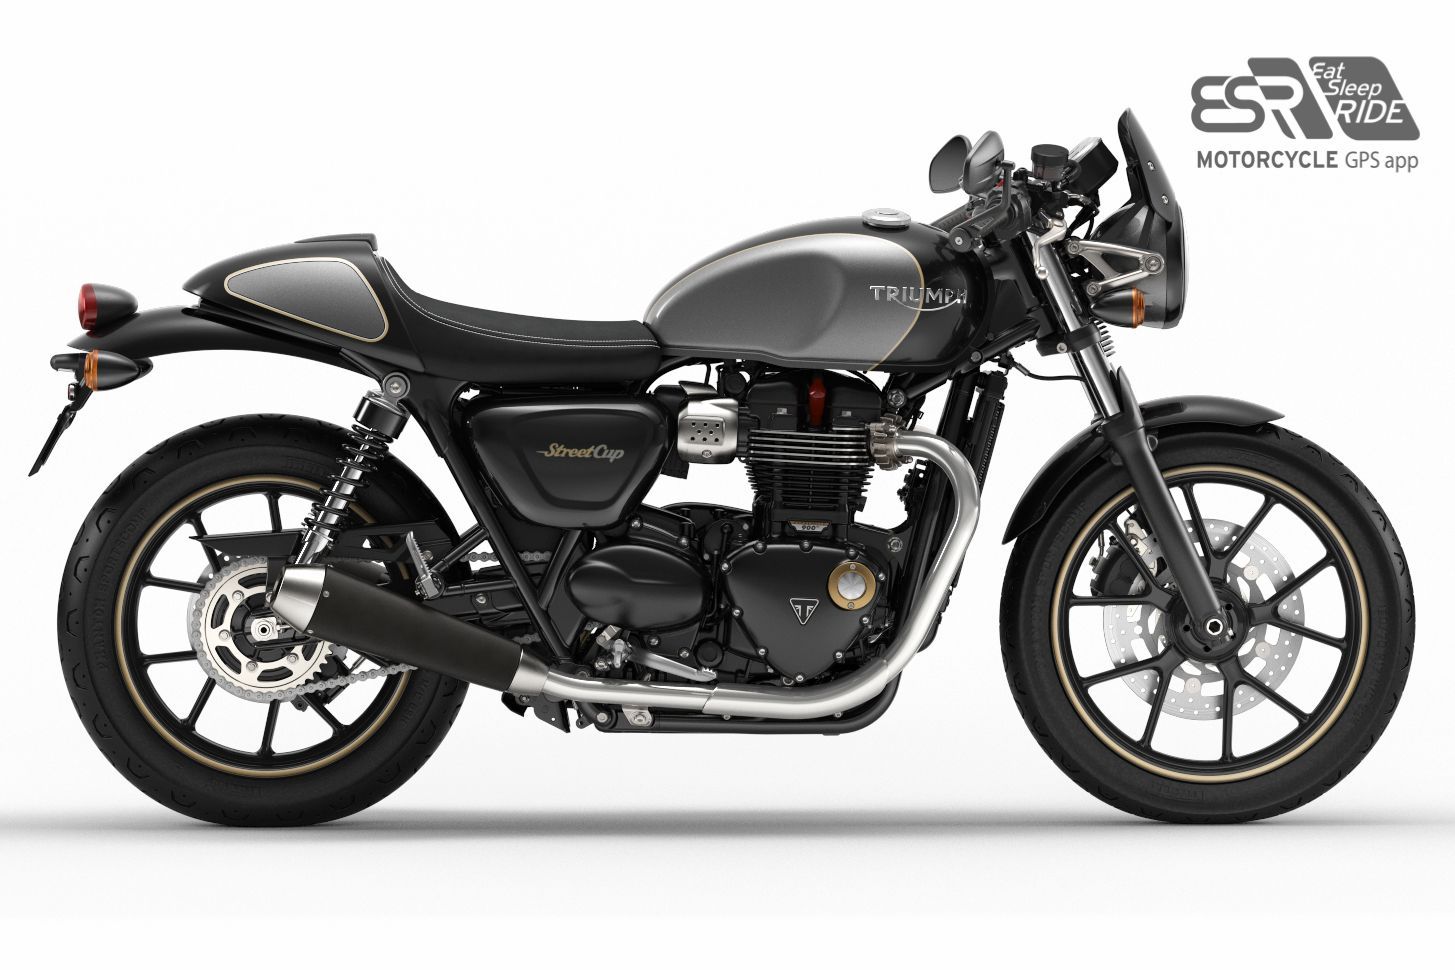 TRIUMPH 2017 JET BLACK STREET CUP launched at INTERMOT